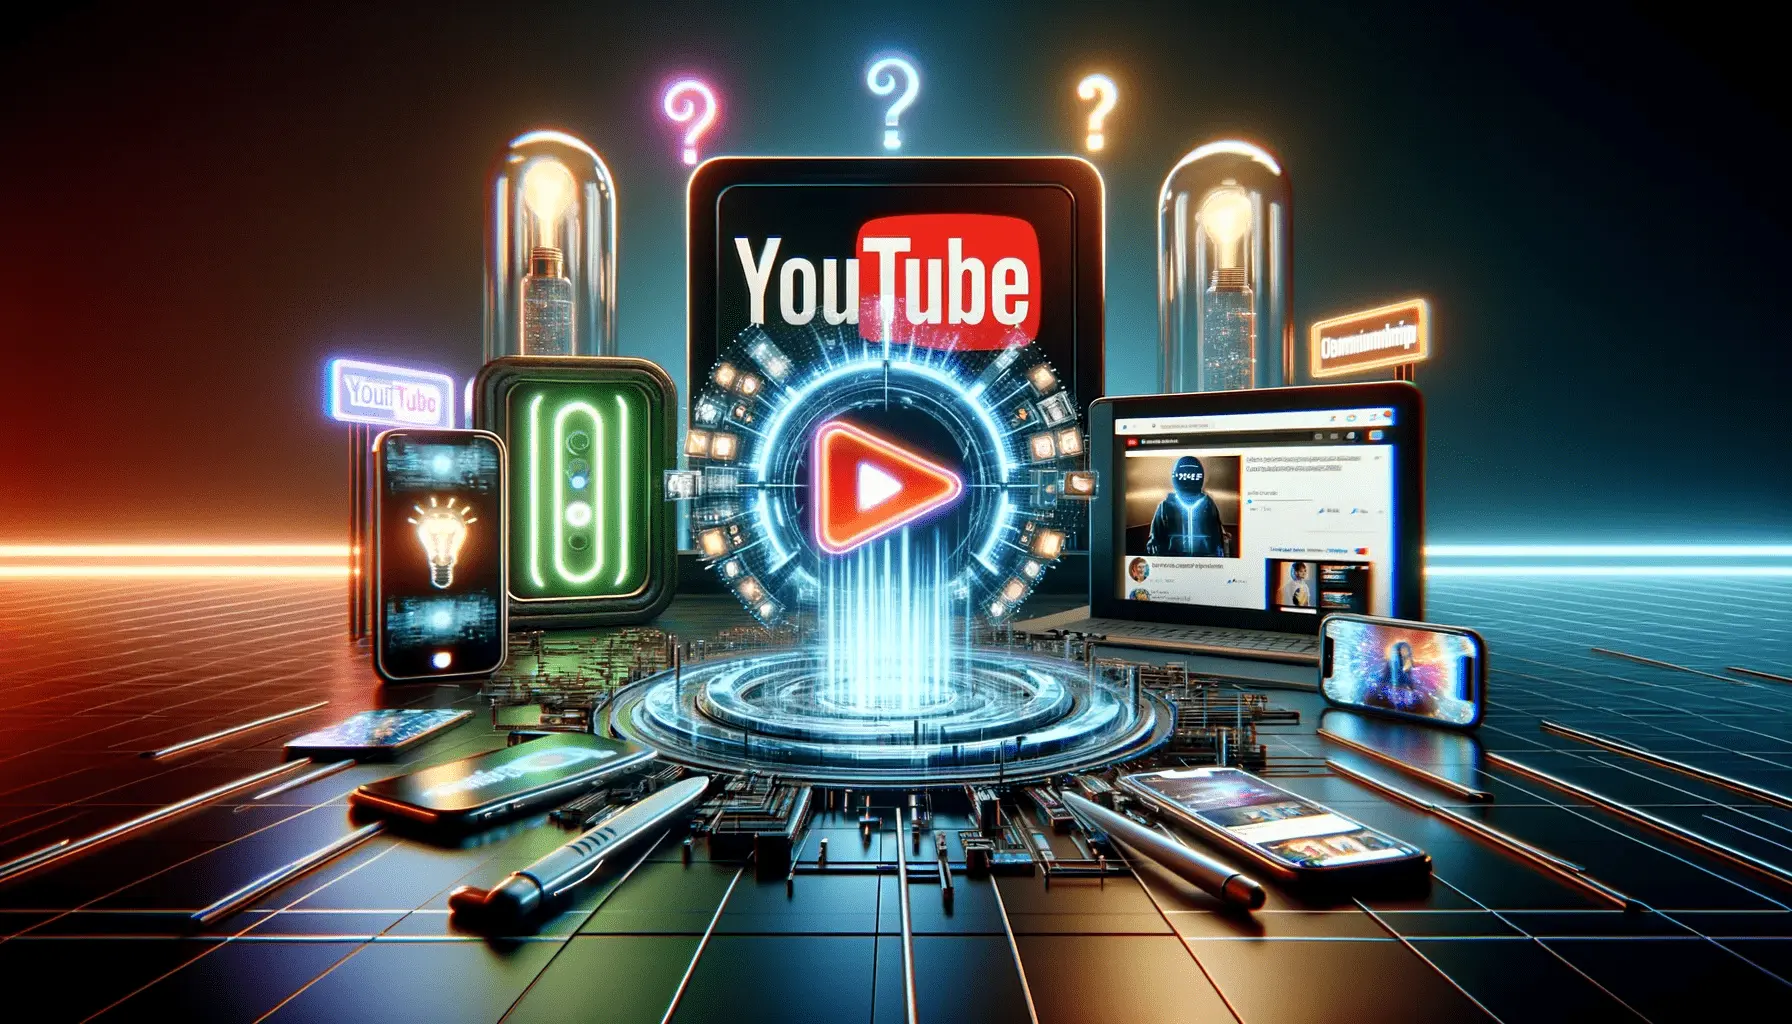 6 Ad Placement Strategies for YouTube Visibility